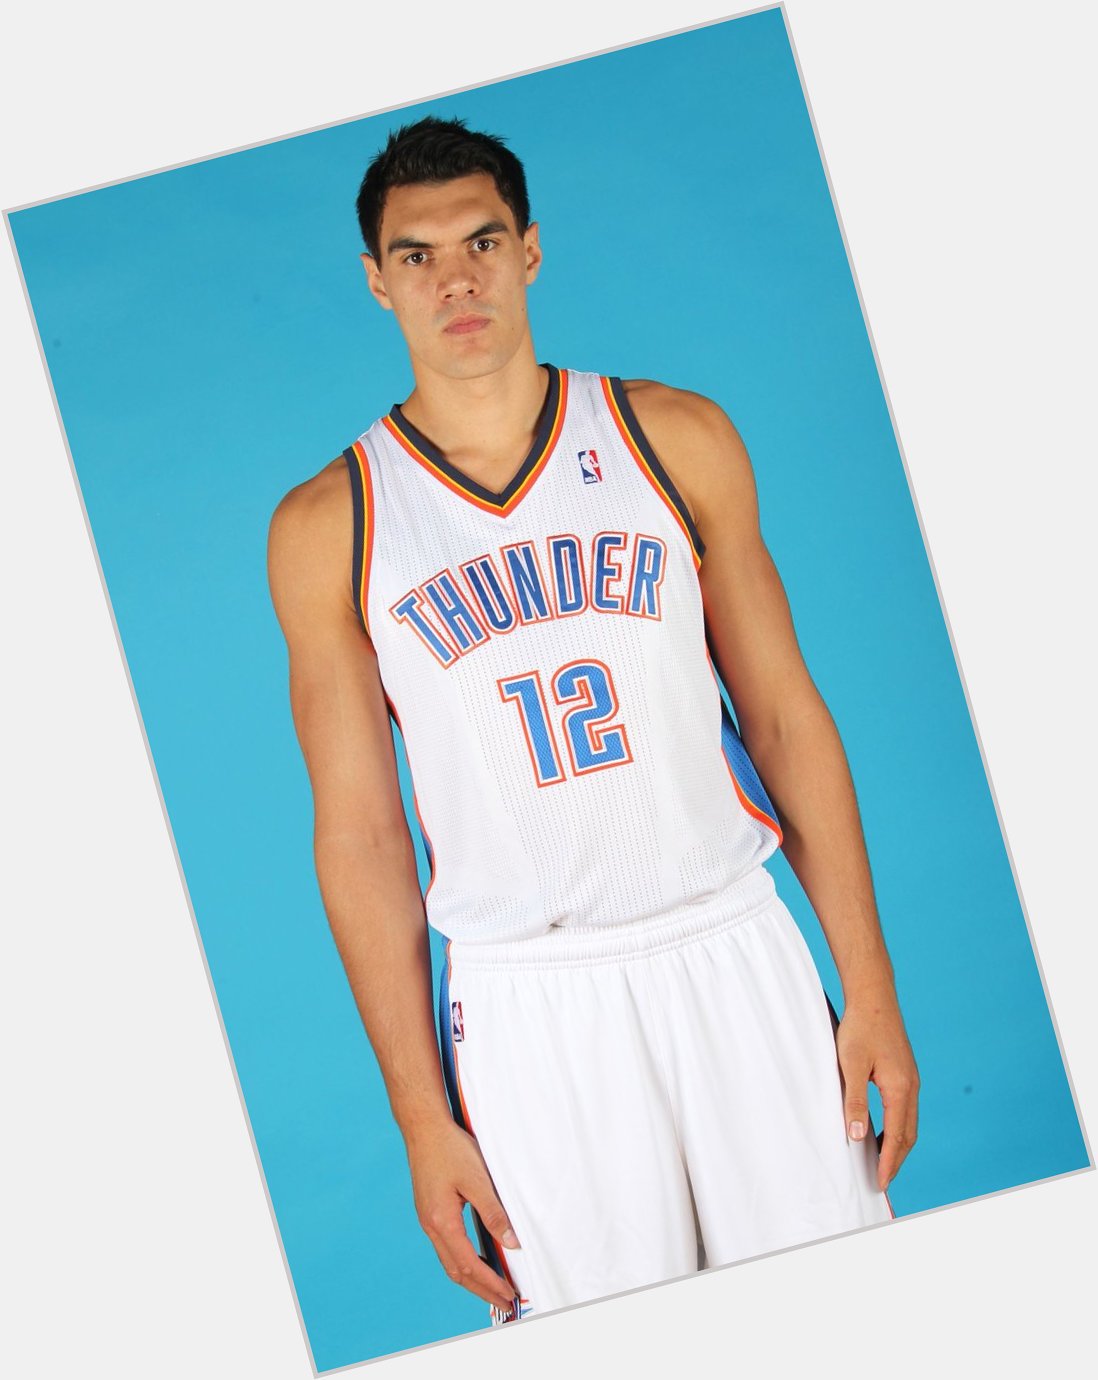 Happy birthday to Steven Adams, talk about growth 